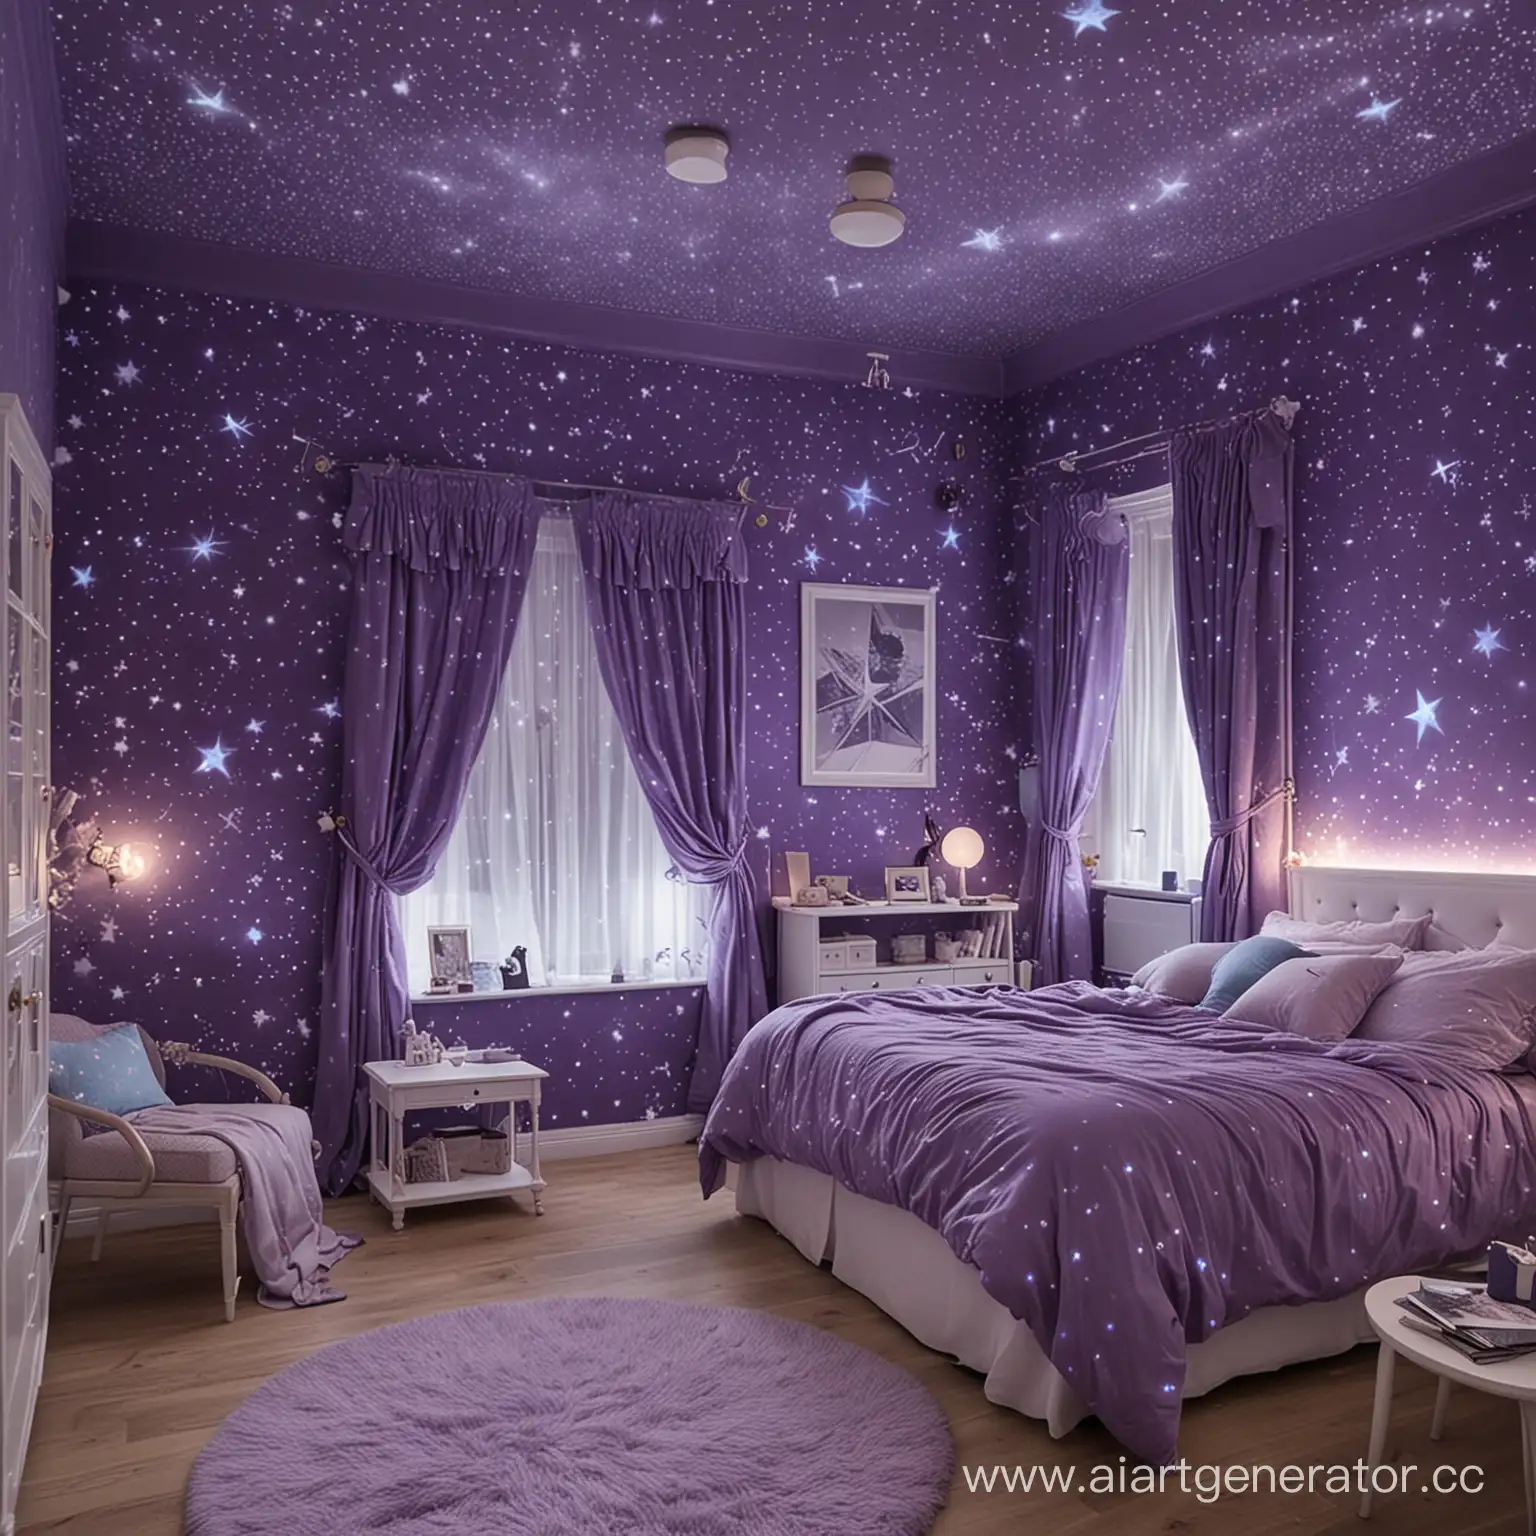 Bedroom of girl with star theme. Purple and blue shades. Some constellations pattern on the wall papers. Without character. Room a bit messy because its owner doesn't care about cleaning. 